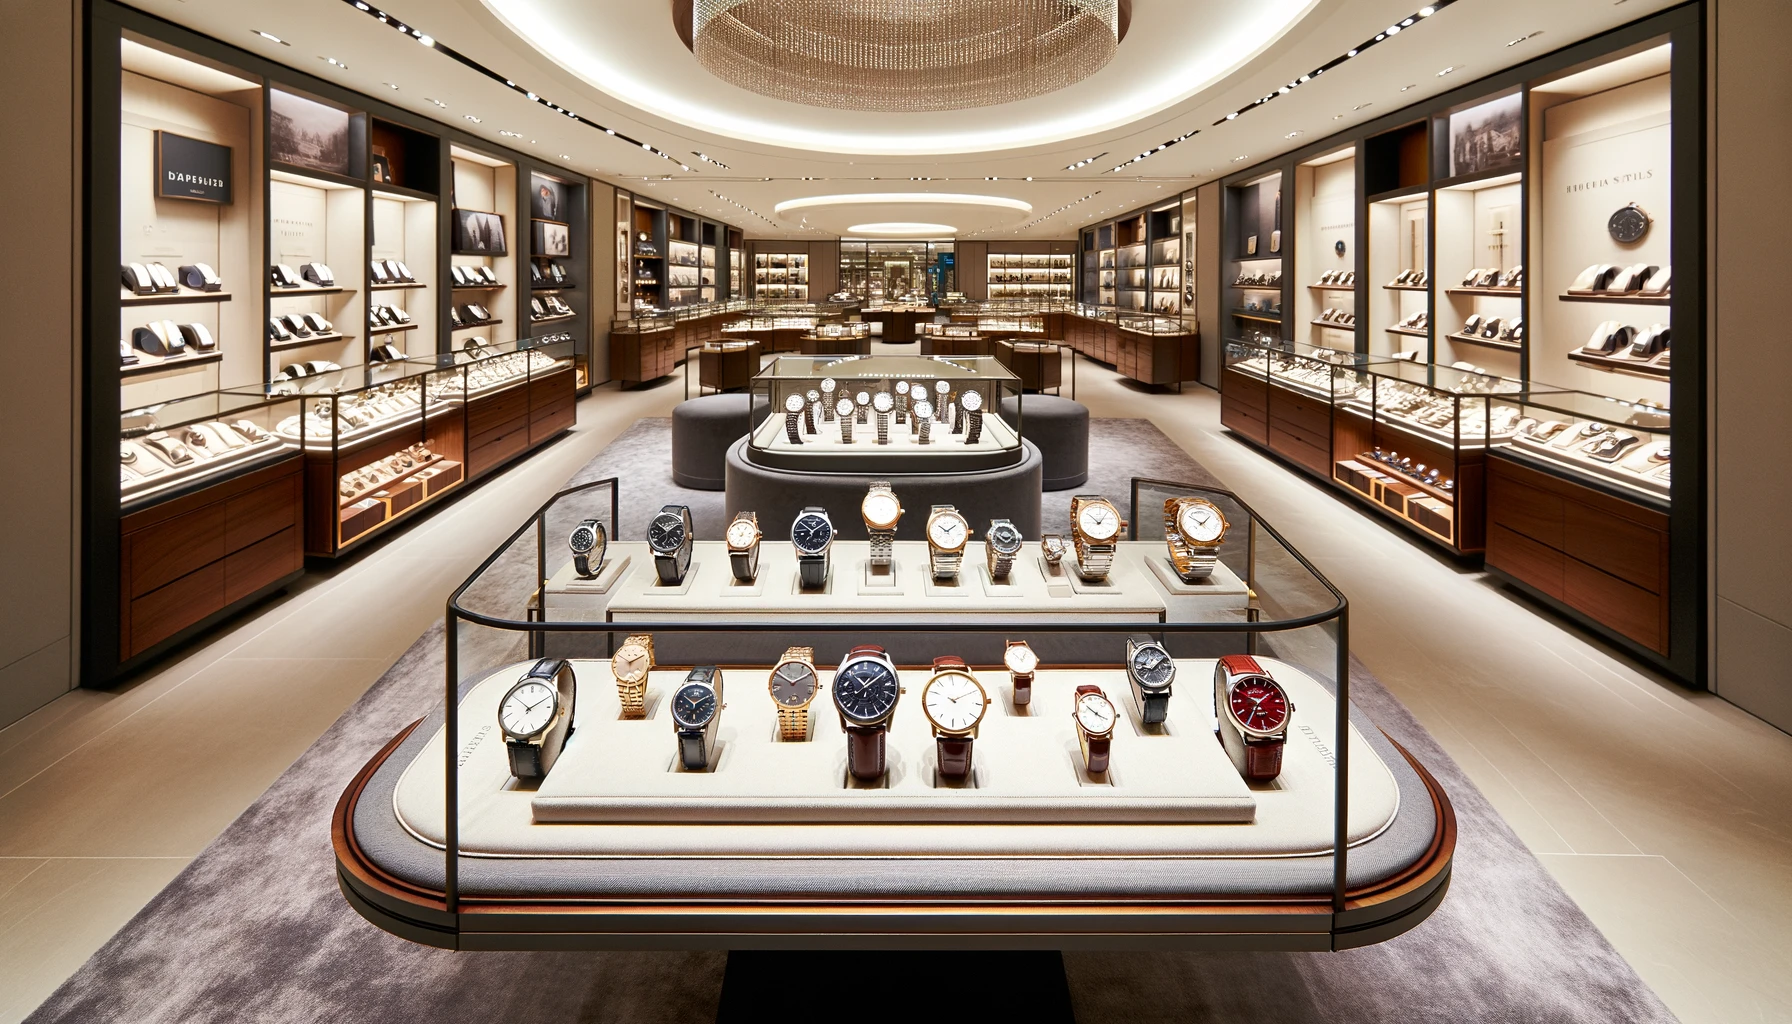 A wide, elegant display of a variety of high-end watches arranged neatly in a luxurious outlet store setting. The watches, showcasing different styles and designs from classic to modern, are placed on velvet cushions and pedestals under soft, sophisticated lighting that highlights their craftsmanship and detail. The backdrop is a chic, well-organized outlet interior with glass cases and wooden accents, giving a sense of exclusivity and variety in the selection.